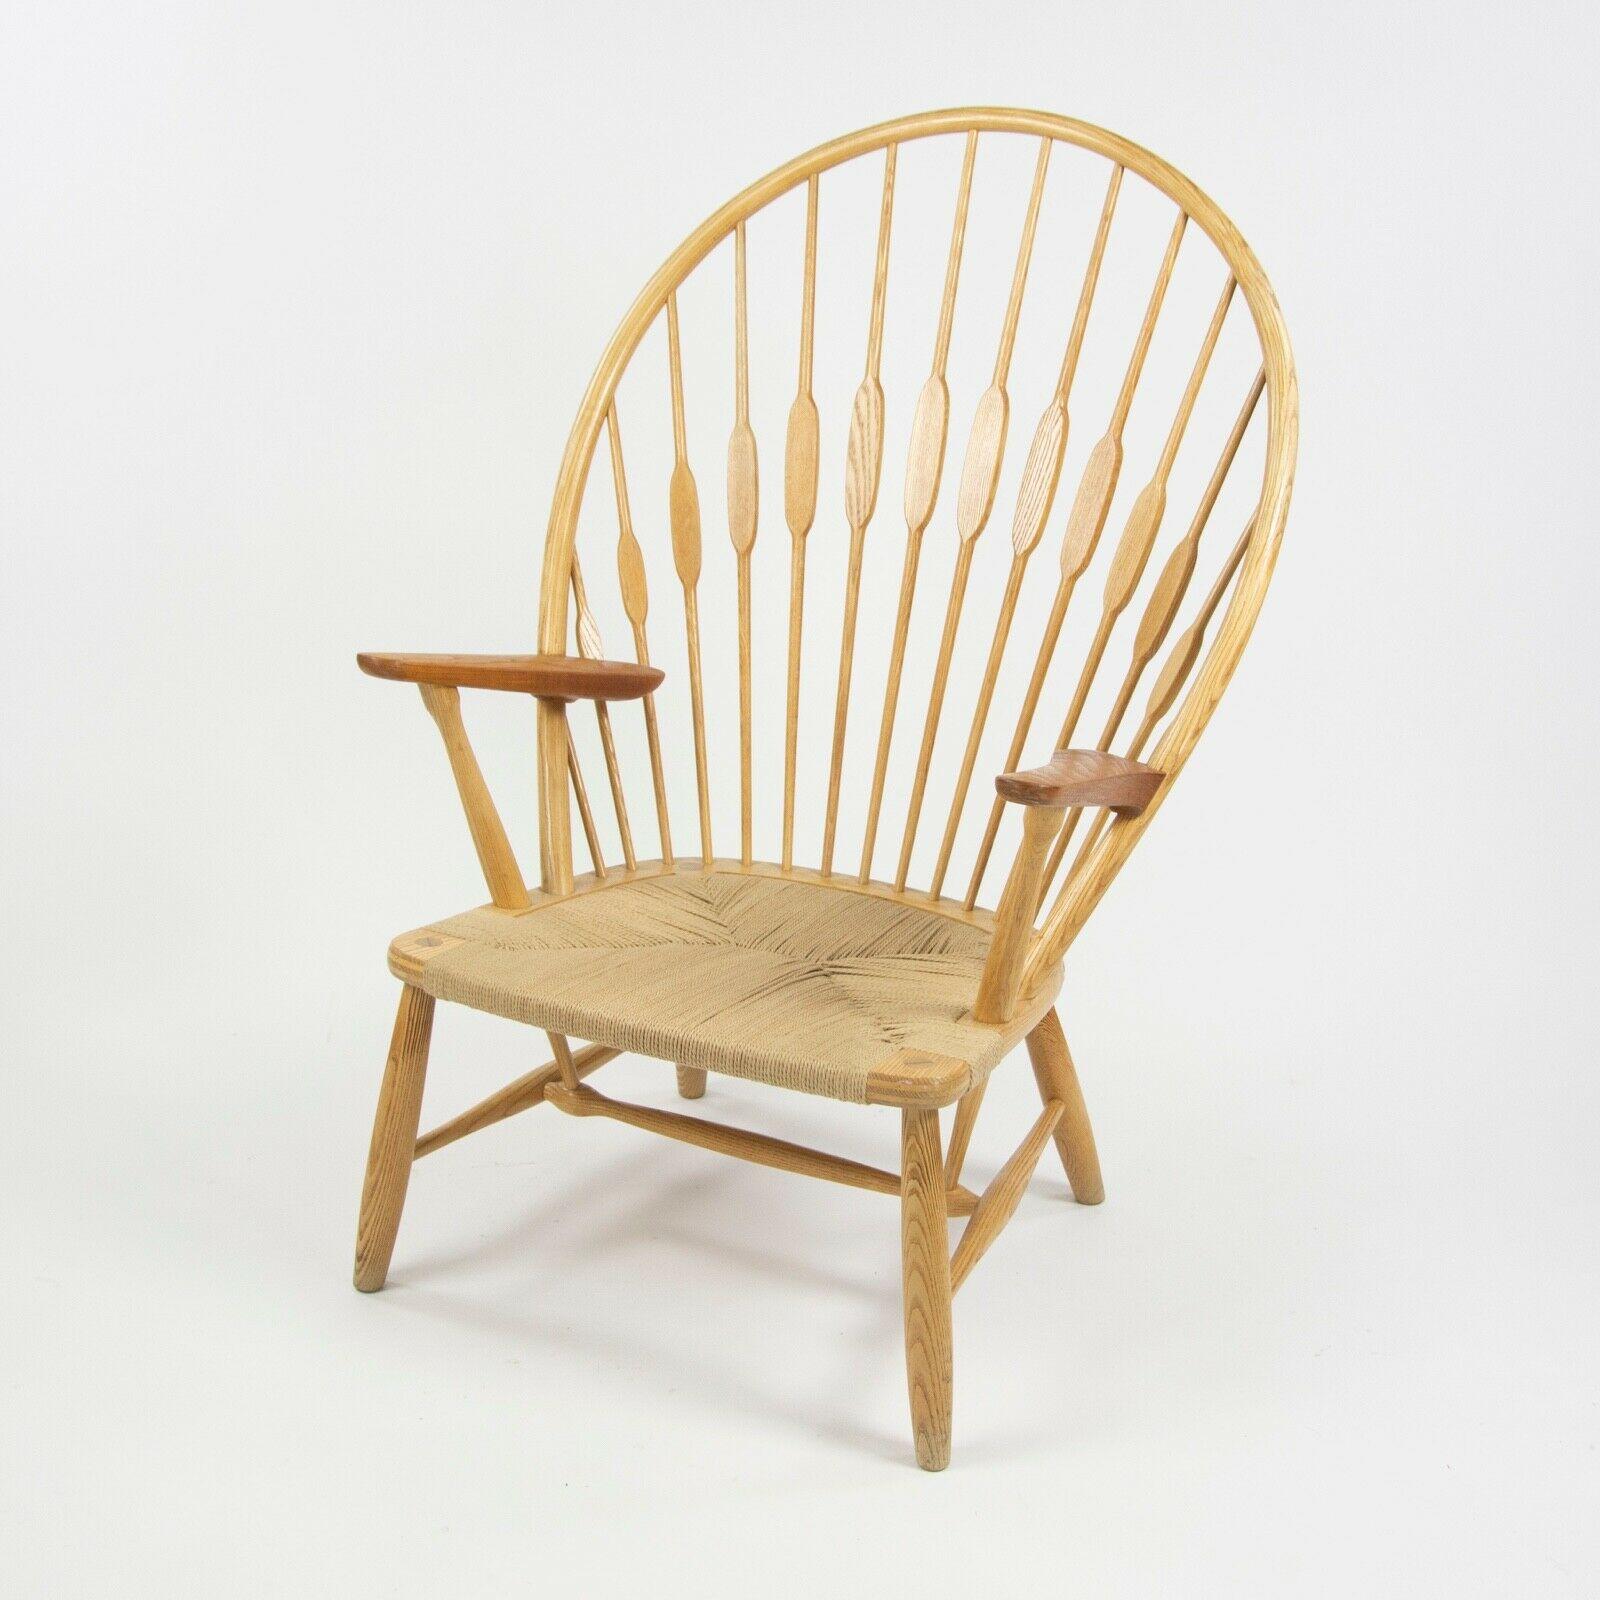 Listed for sale is an original Peacock Chair, designed by Hans Wegner and produced by Johannes Hansen in Copenhagen, Denmark. This example is in very good vintage condition with some light wear and signs of use. It has a lovely patina to the legs